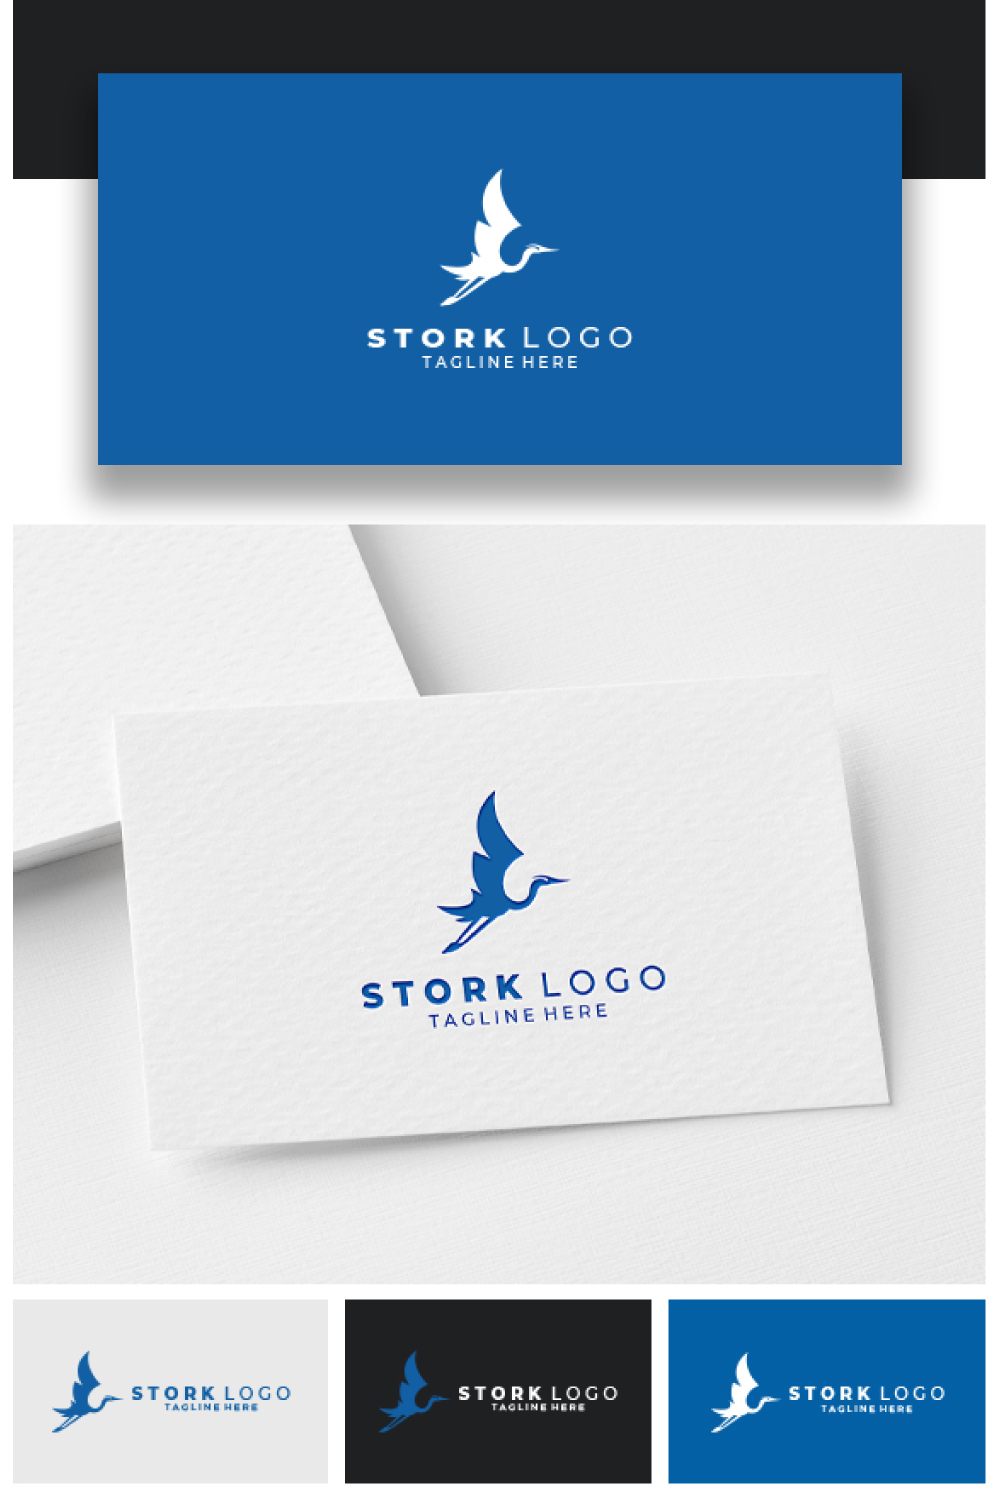 White and blue business card with a bird logo.